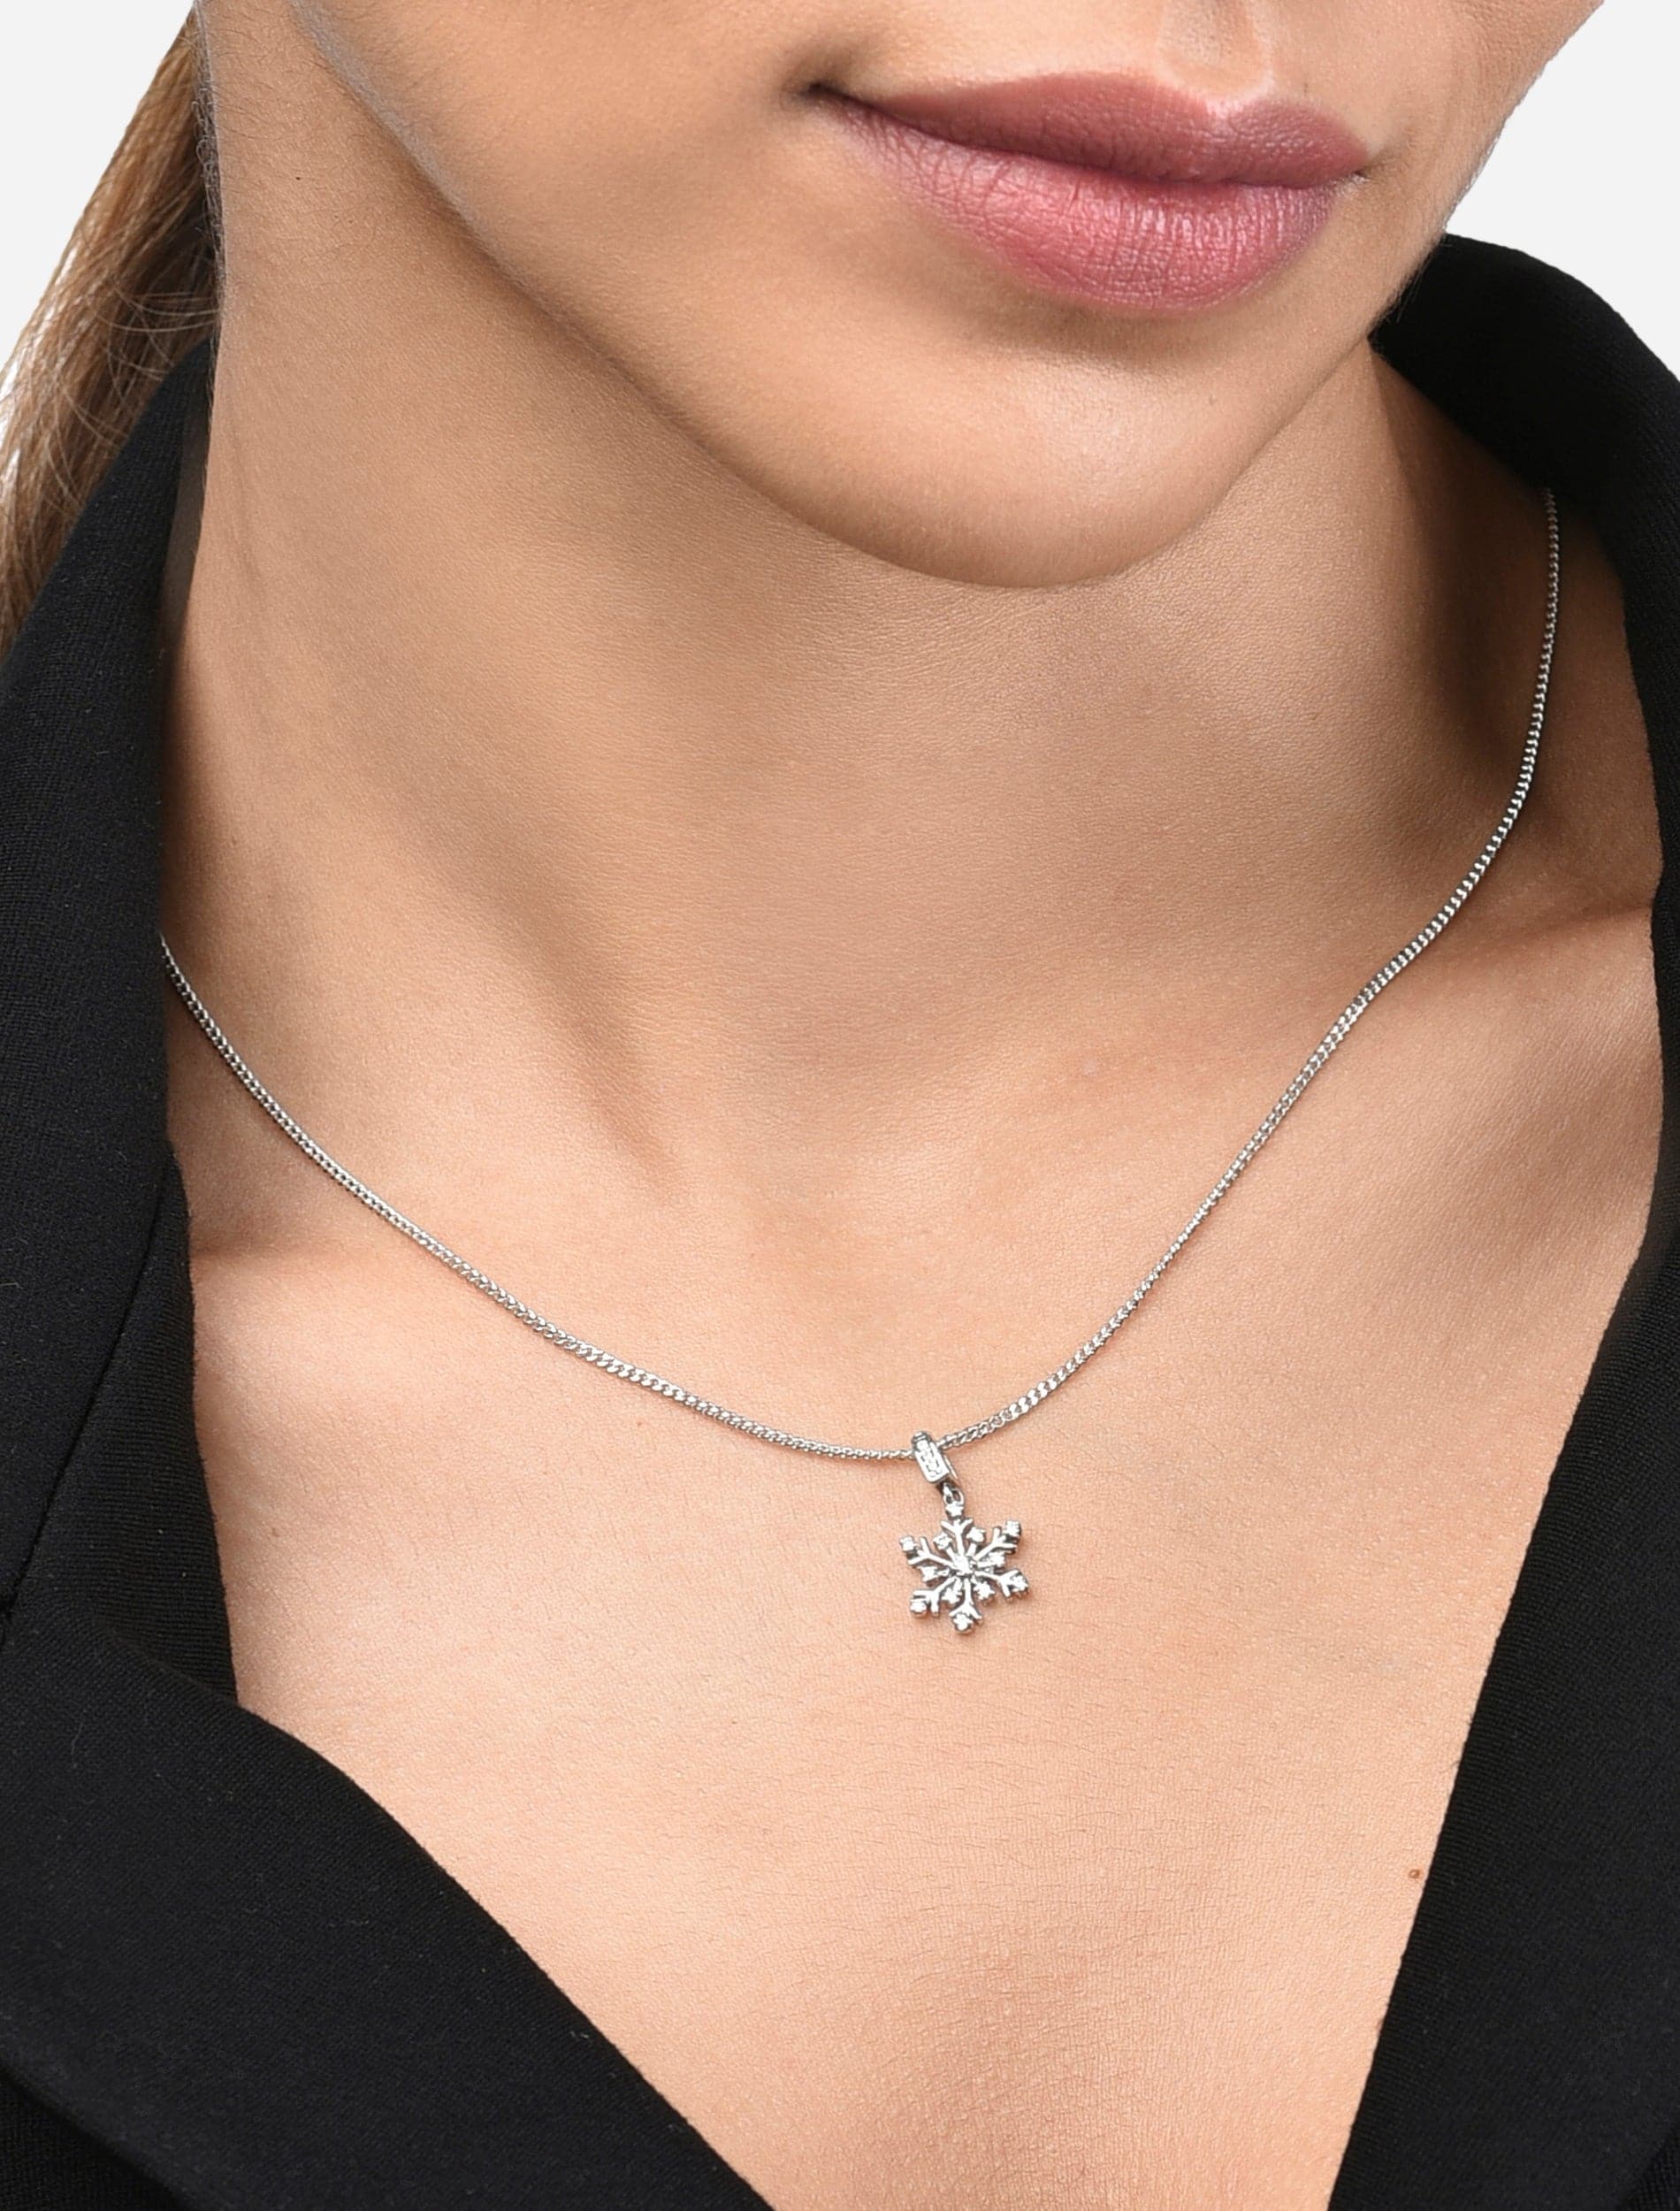 SOLD - The Blossom: Tiffany & Company Flower Necklace with Diamonds